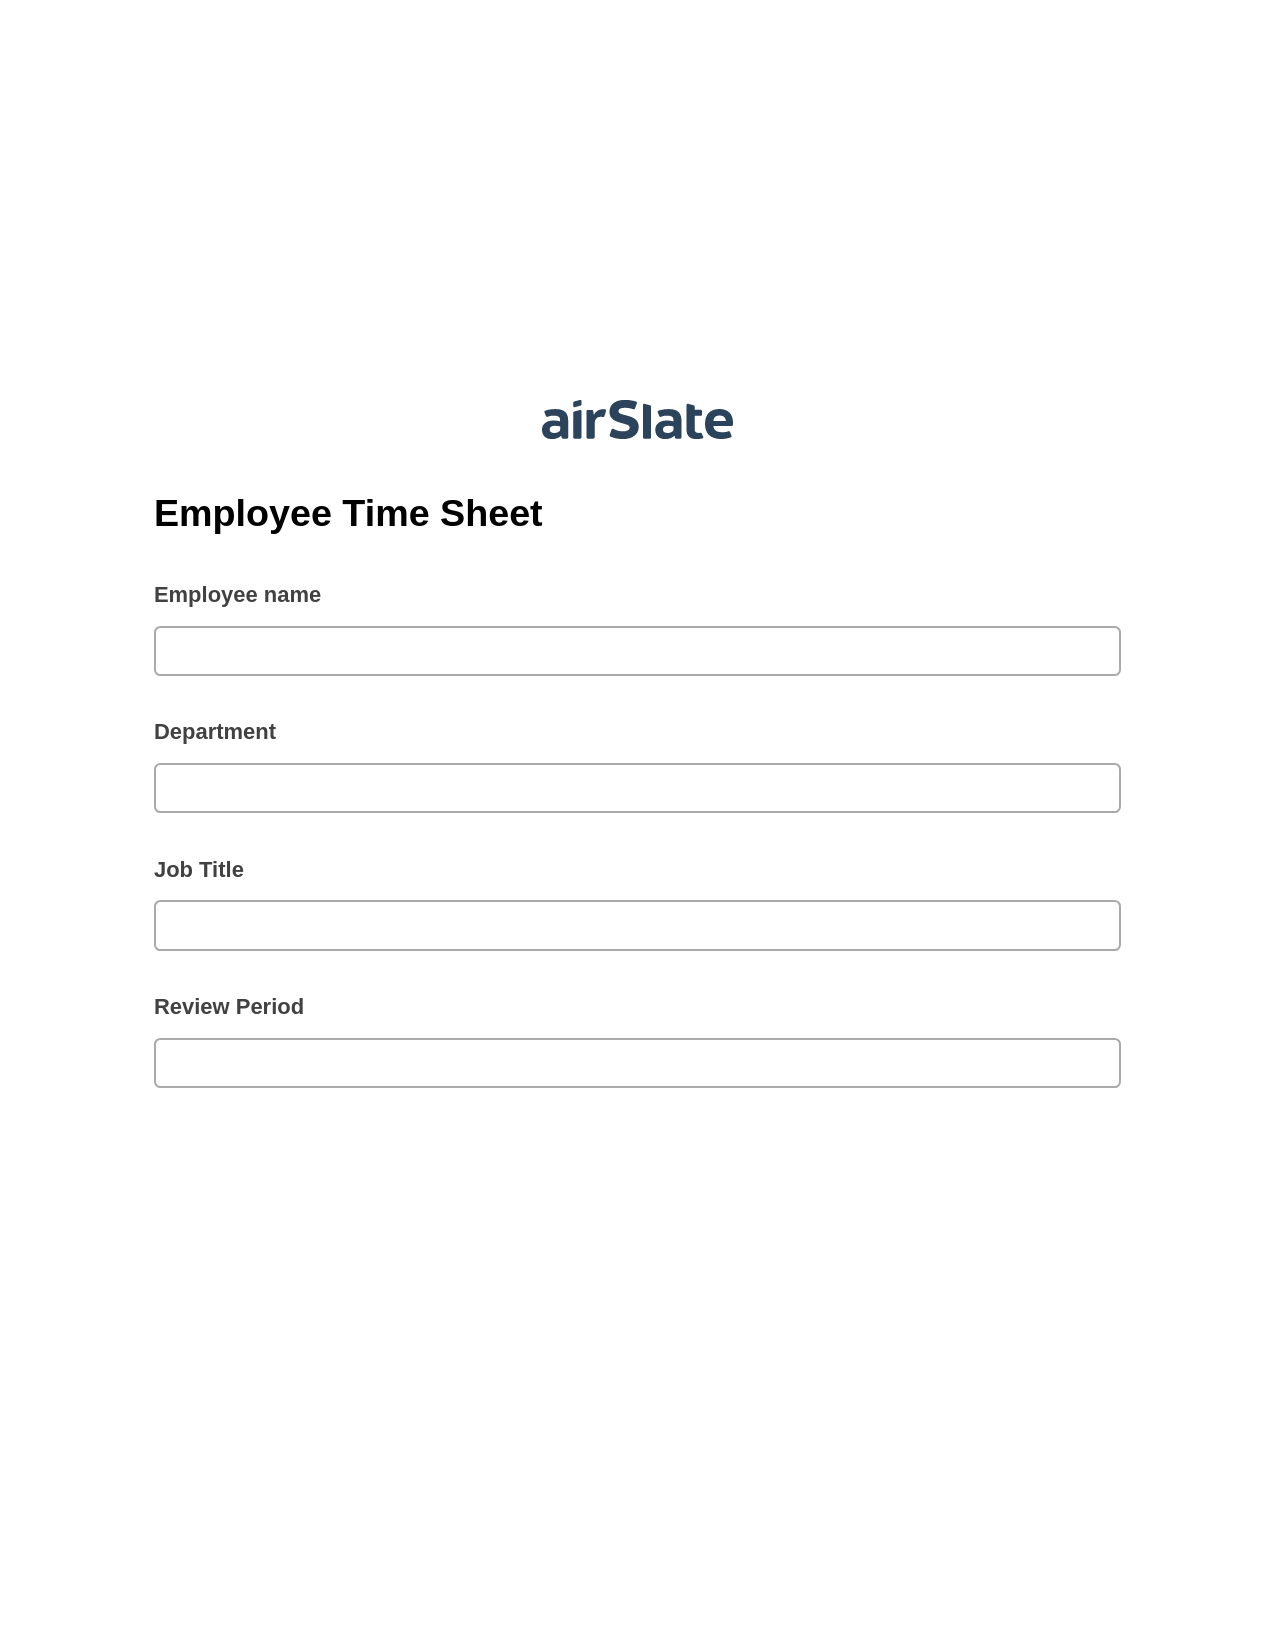 Employee Time Sheet Pre-fill from Google Sheets Bot, Create slate addon, Archive to Dropbox Bot